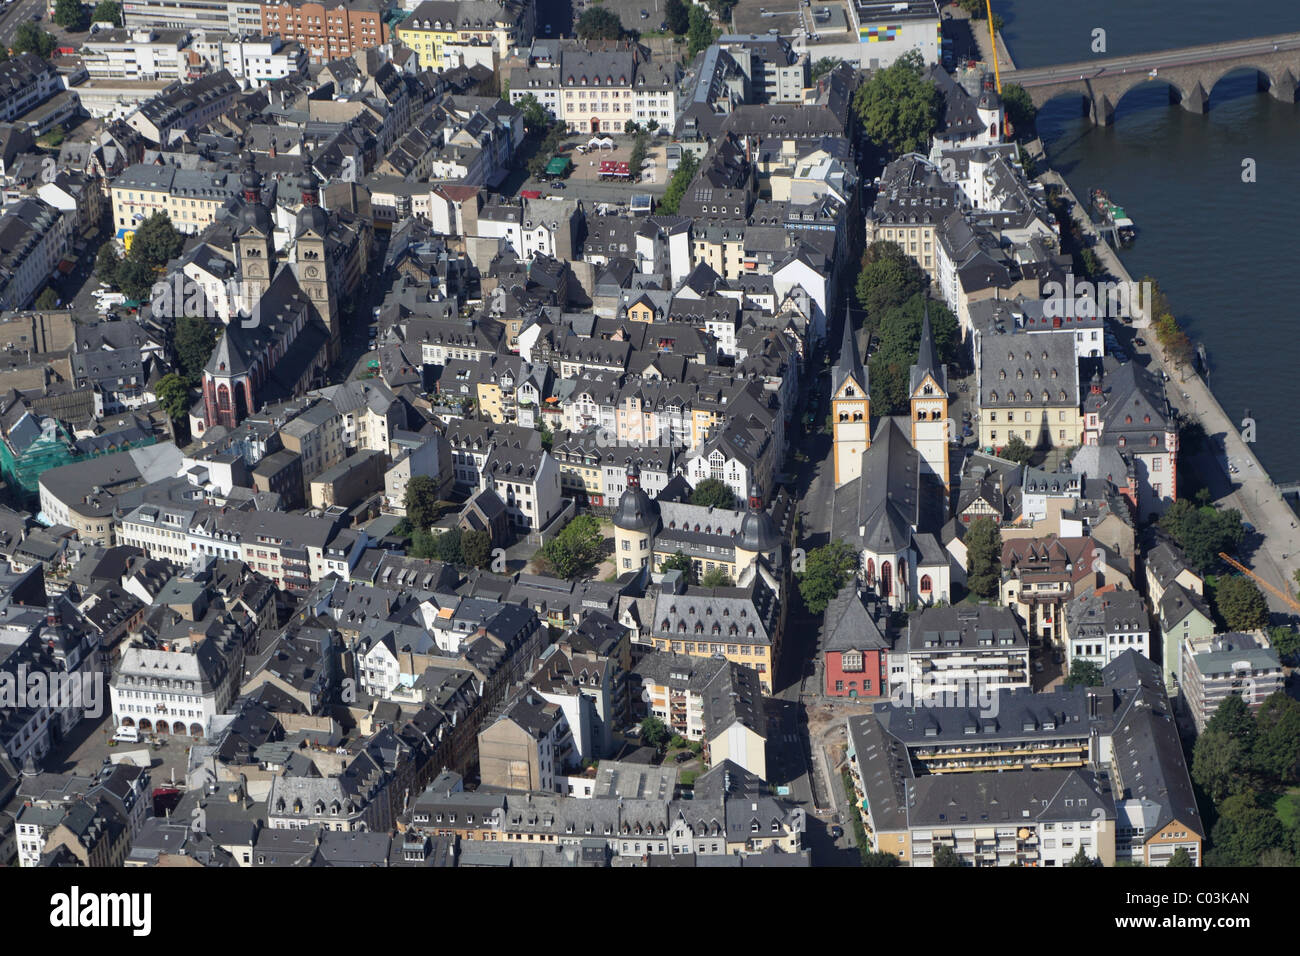 Aerial view, historic town centre, Koblenz, Rhineland-Palatinate, Germany, Europe Stock Photo